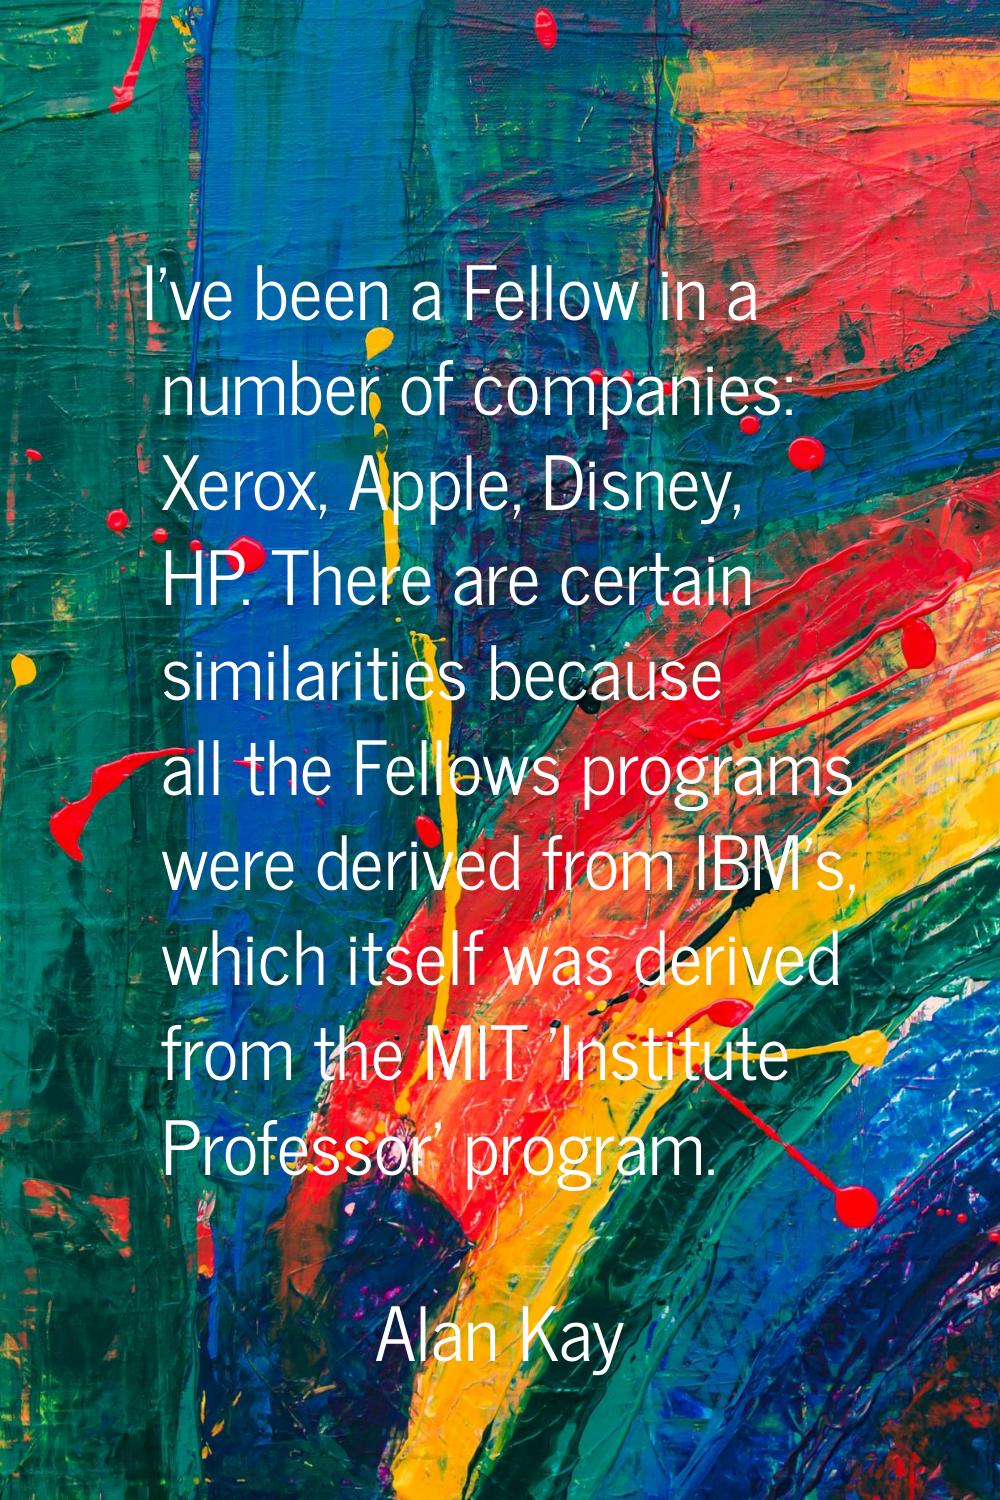 I've been a Fellow in a number of companies: Xerox, Apple, Disney, HP. There are certain similariti